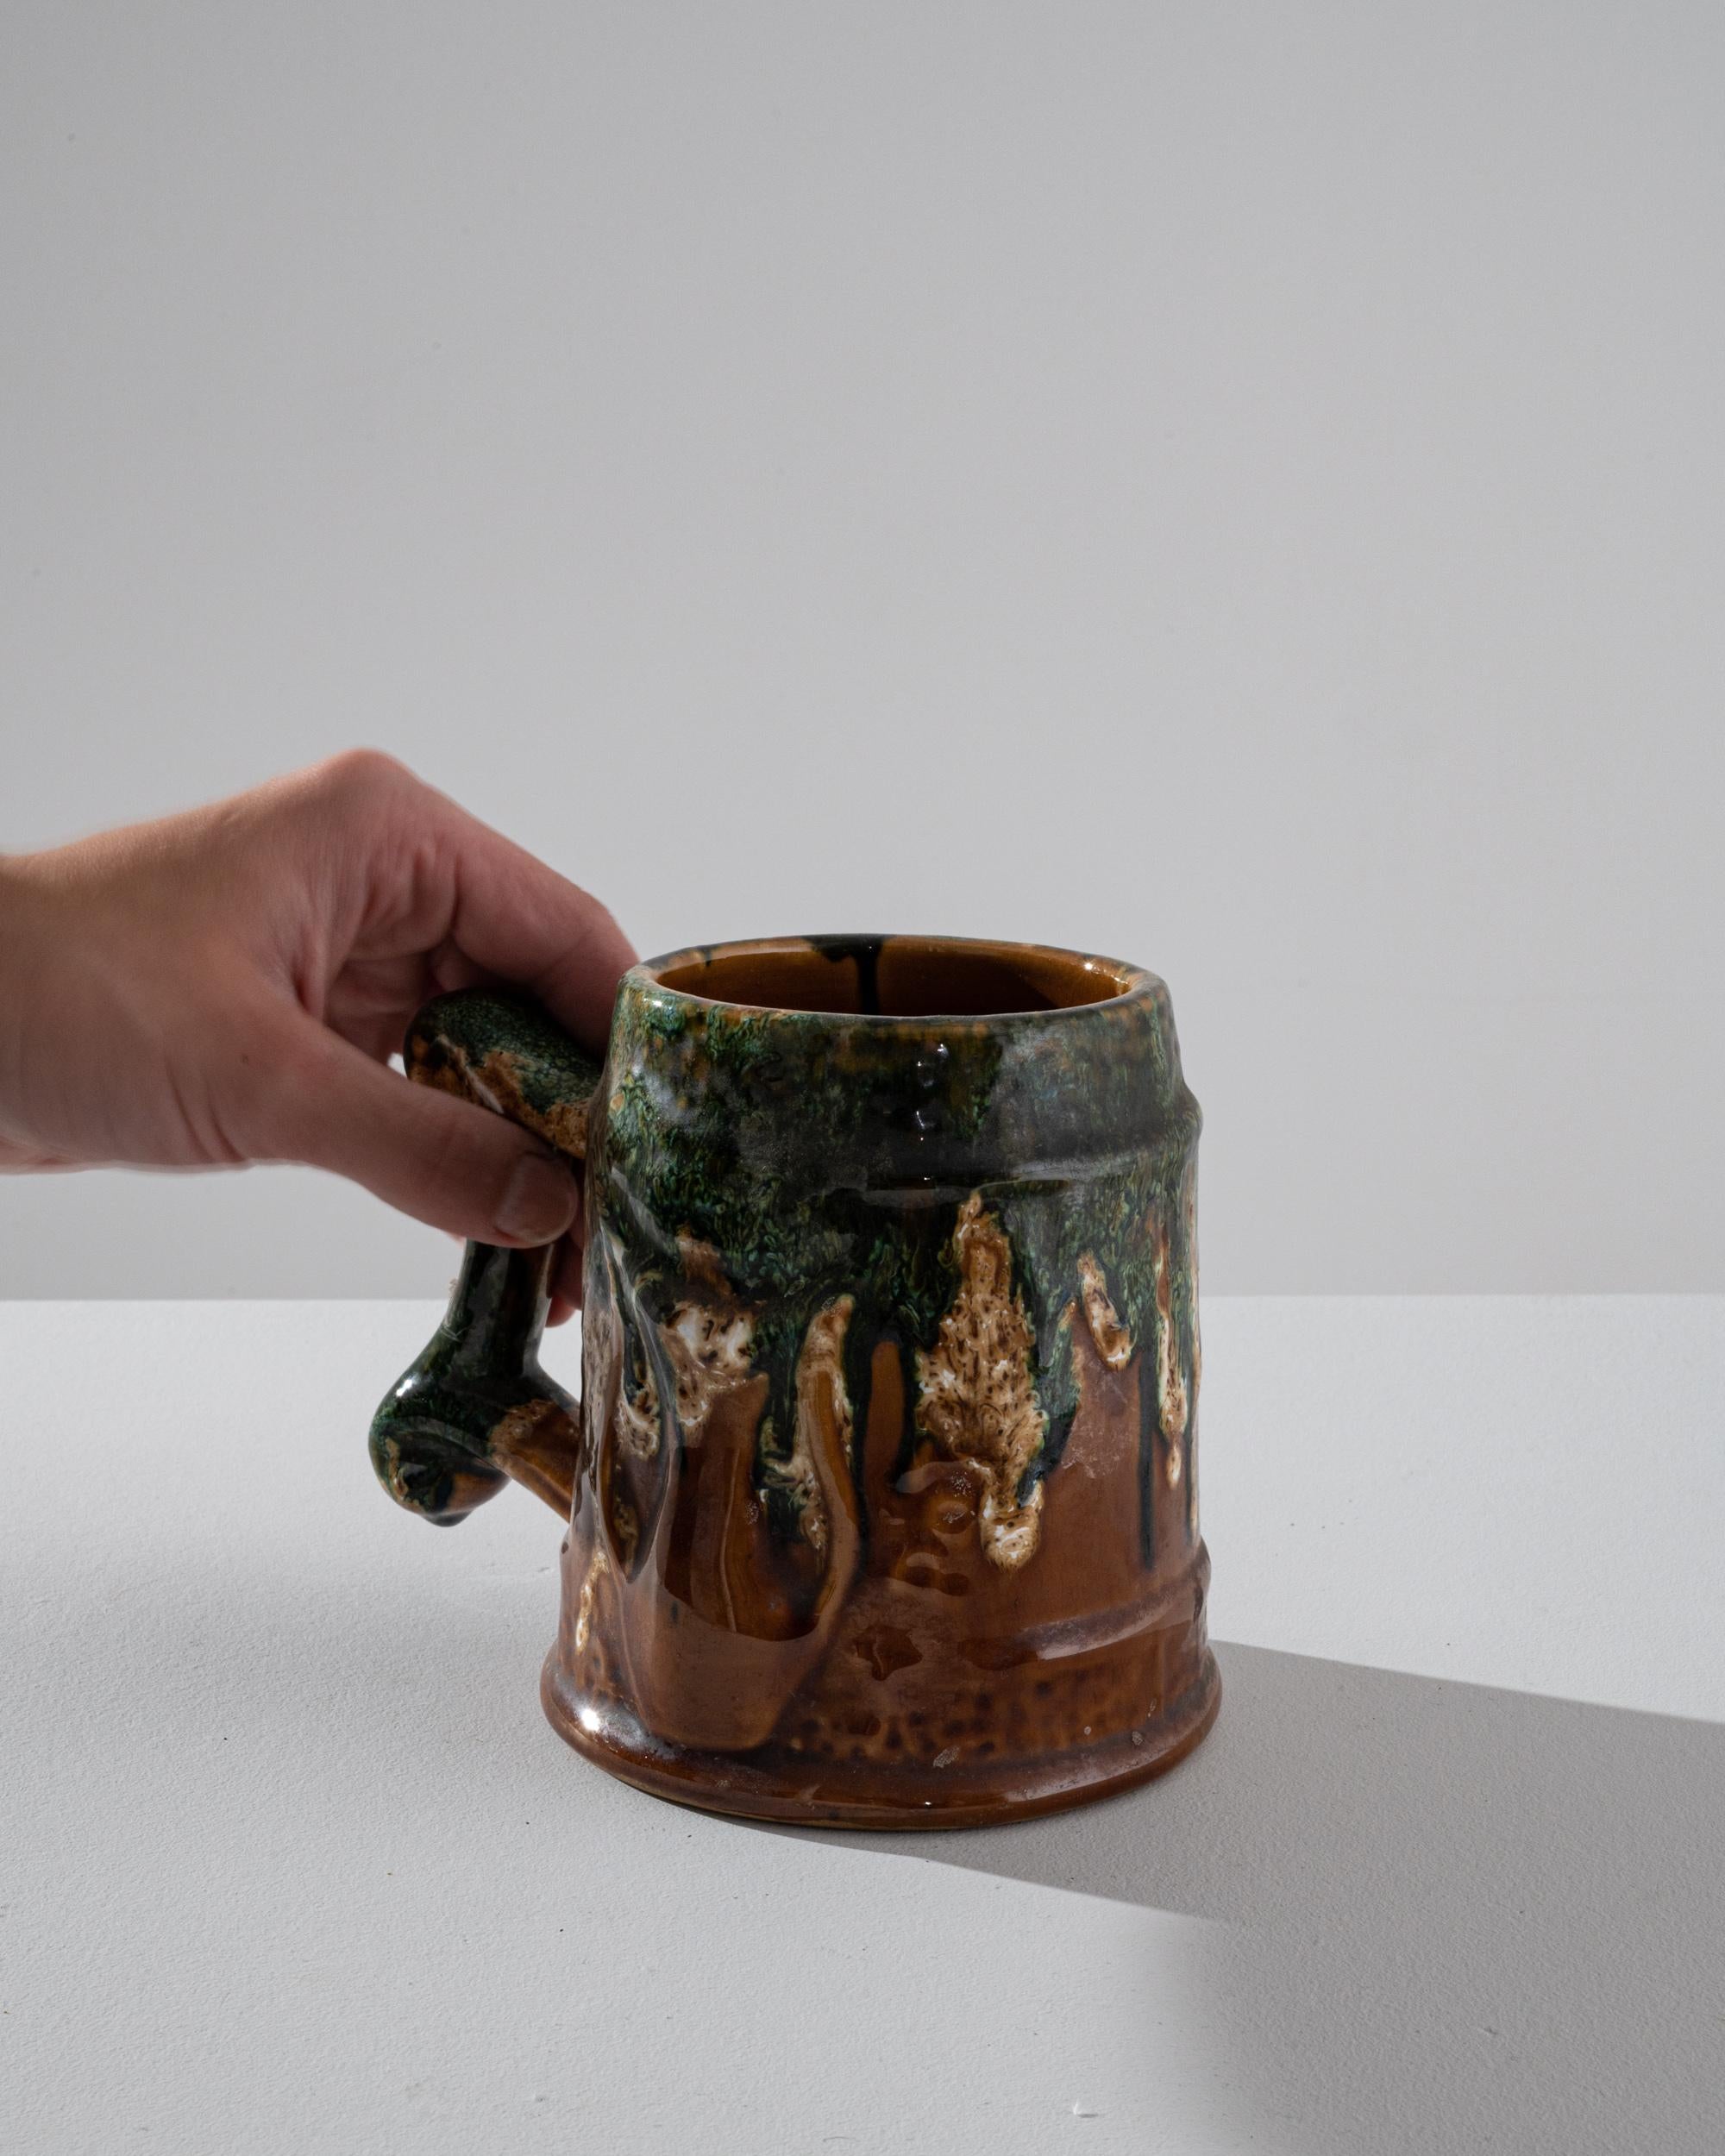 This 20th Century Belgian ceramic vase offers a unique blend of rustic charm and artistic expression. The robust form is complemented by a rich, earthy glaze that features a cascade of green over a deep brown base, reminiscent of a mossy forest